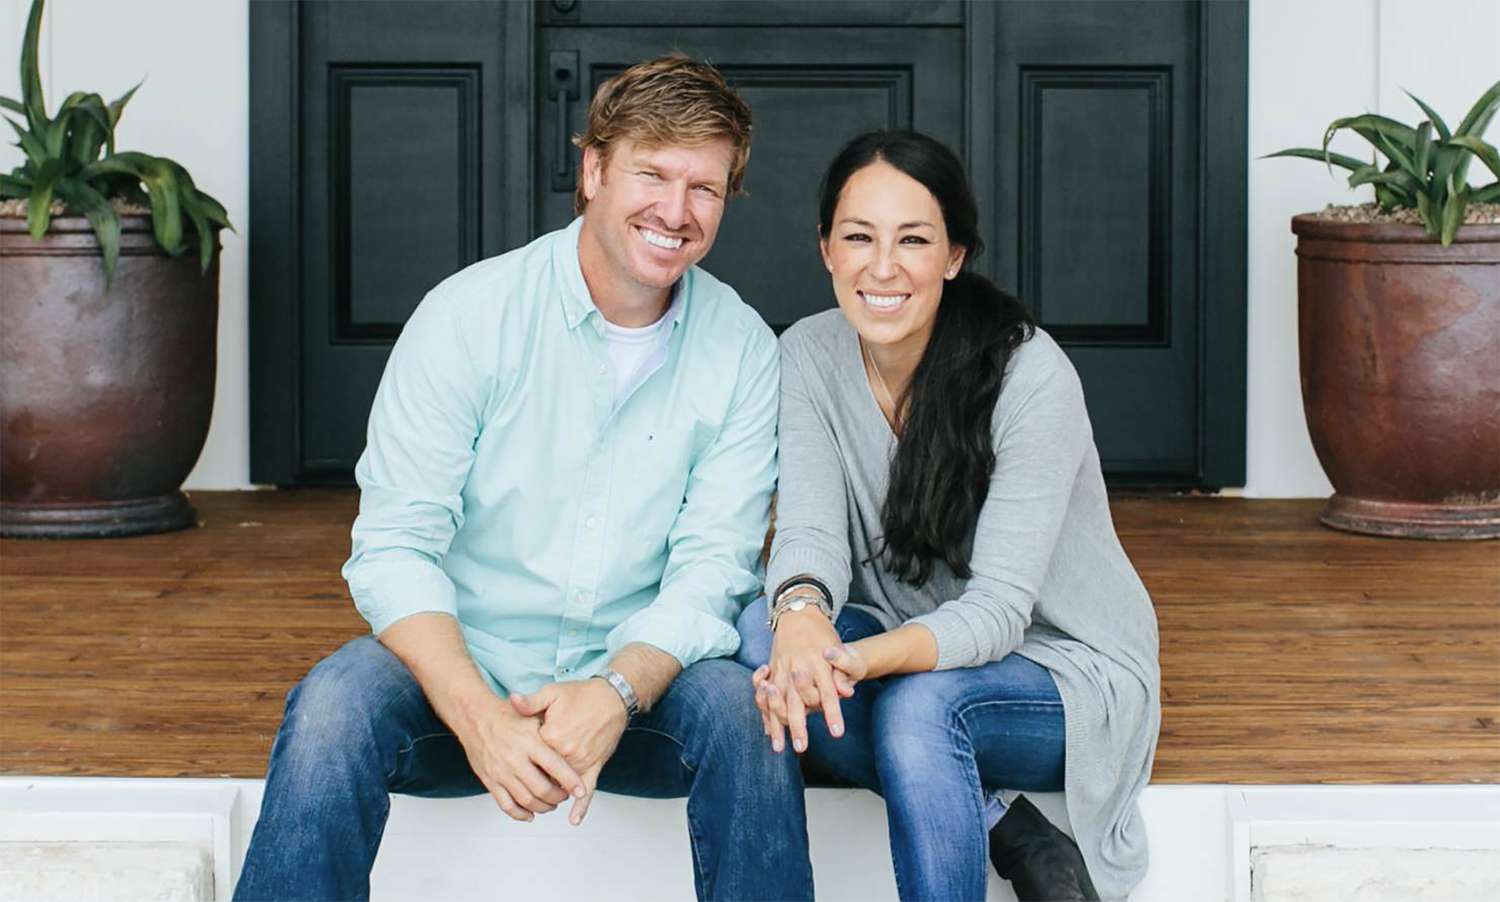 image?url=https%3A%2F%2Fstatic.onecms.io%2Fwp content%2Fuploads%2Fsites%2F23%2F2018%2F09%2F17%2Fchip joanna gaines target collection